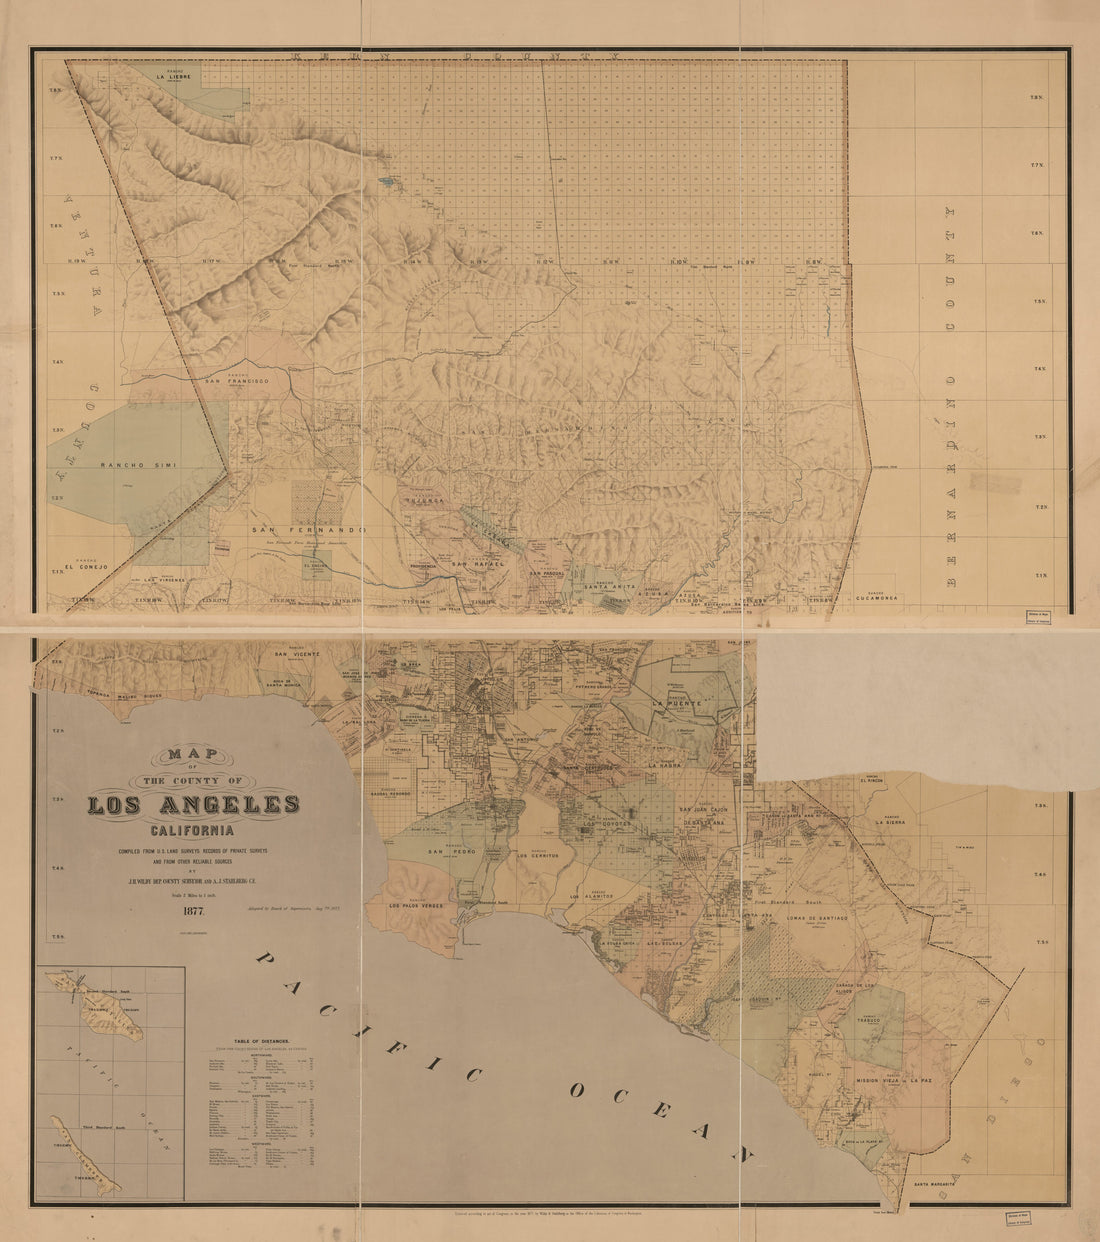 This old map of Map of the County of Los Angeles, California : Compiled from U.S. Land Surveys, Records of Private Surveys, and from Other Reliable Sources from 1877 was created by Julius Bien, A. J. Stahlberg, J. H. Wildy in 1877